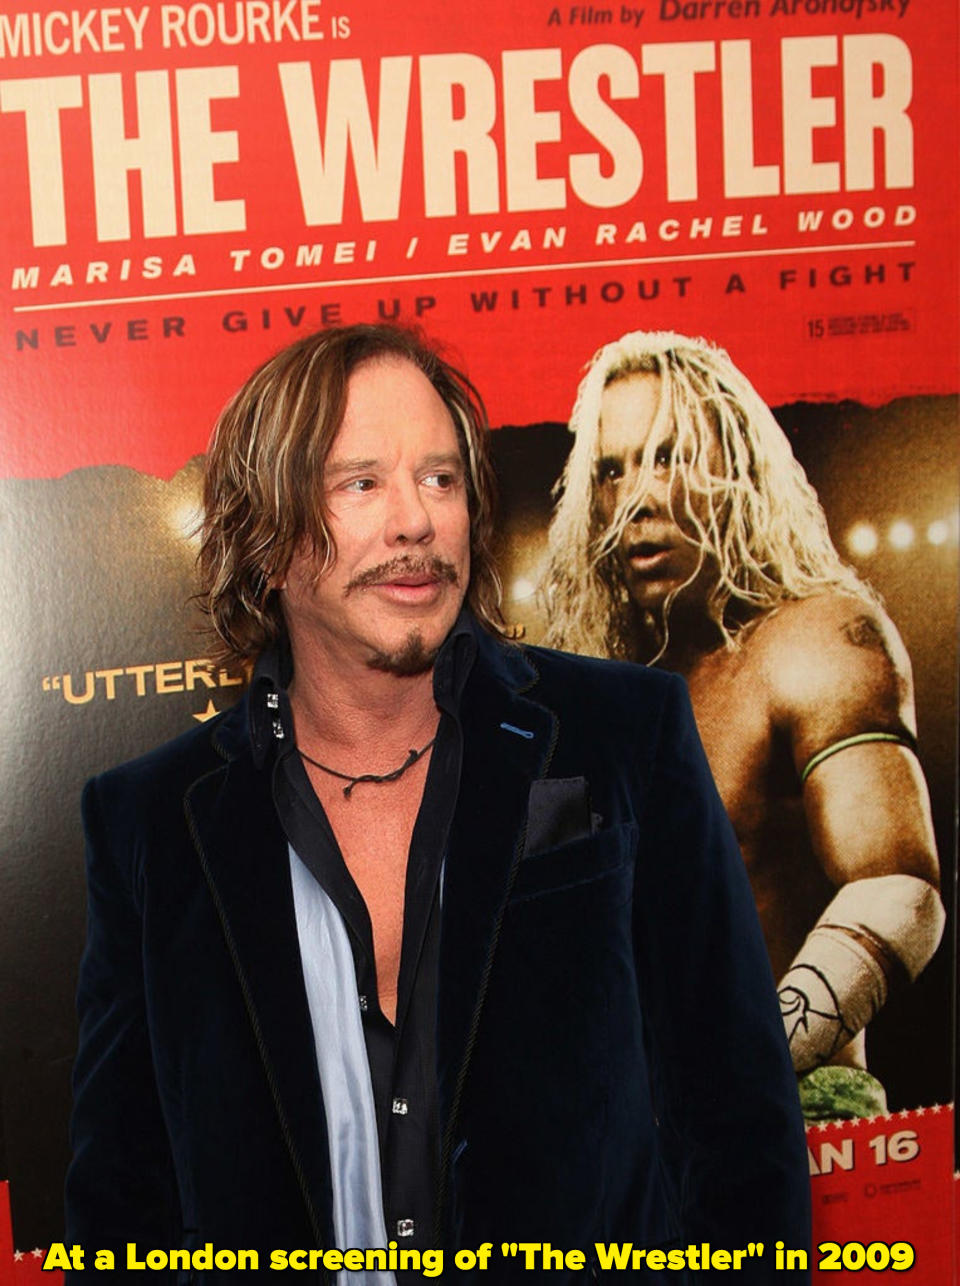 Mickey Rourke standing by a poster for "The Wrestler"